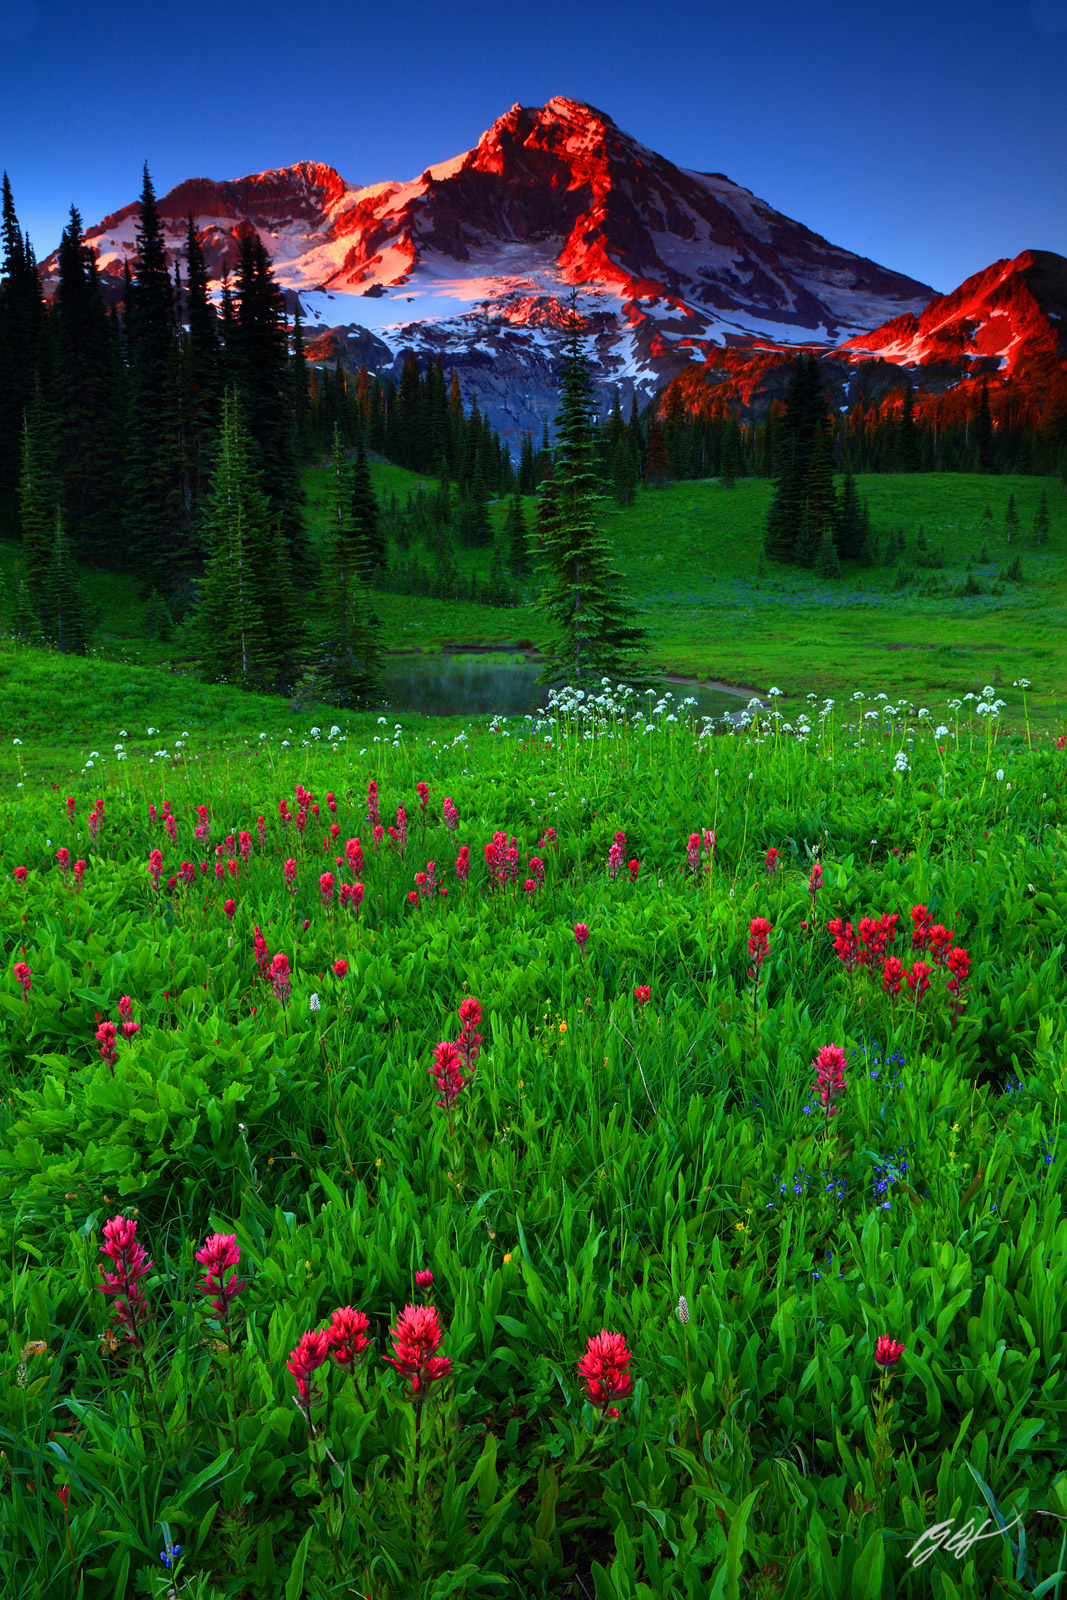 Sunset Wildflowers and Mt Rainier from Indian Henry's Hunting Ground, Mt Rainier National Park in Washington